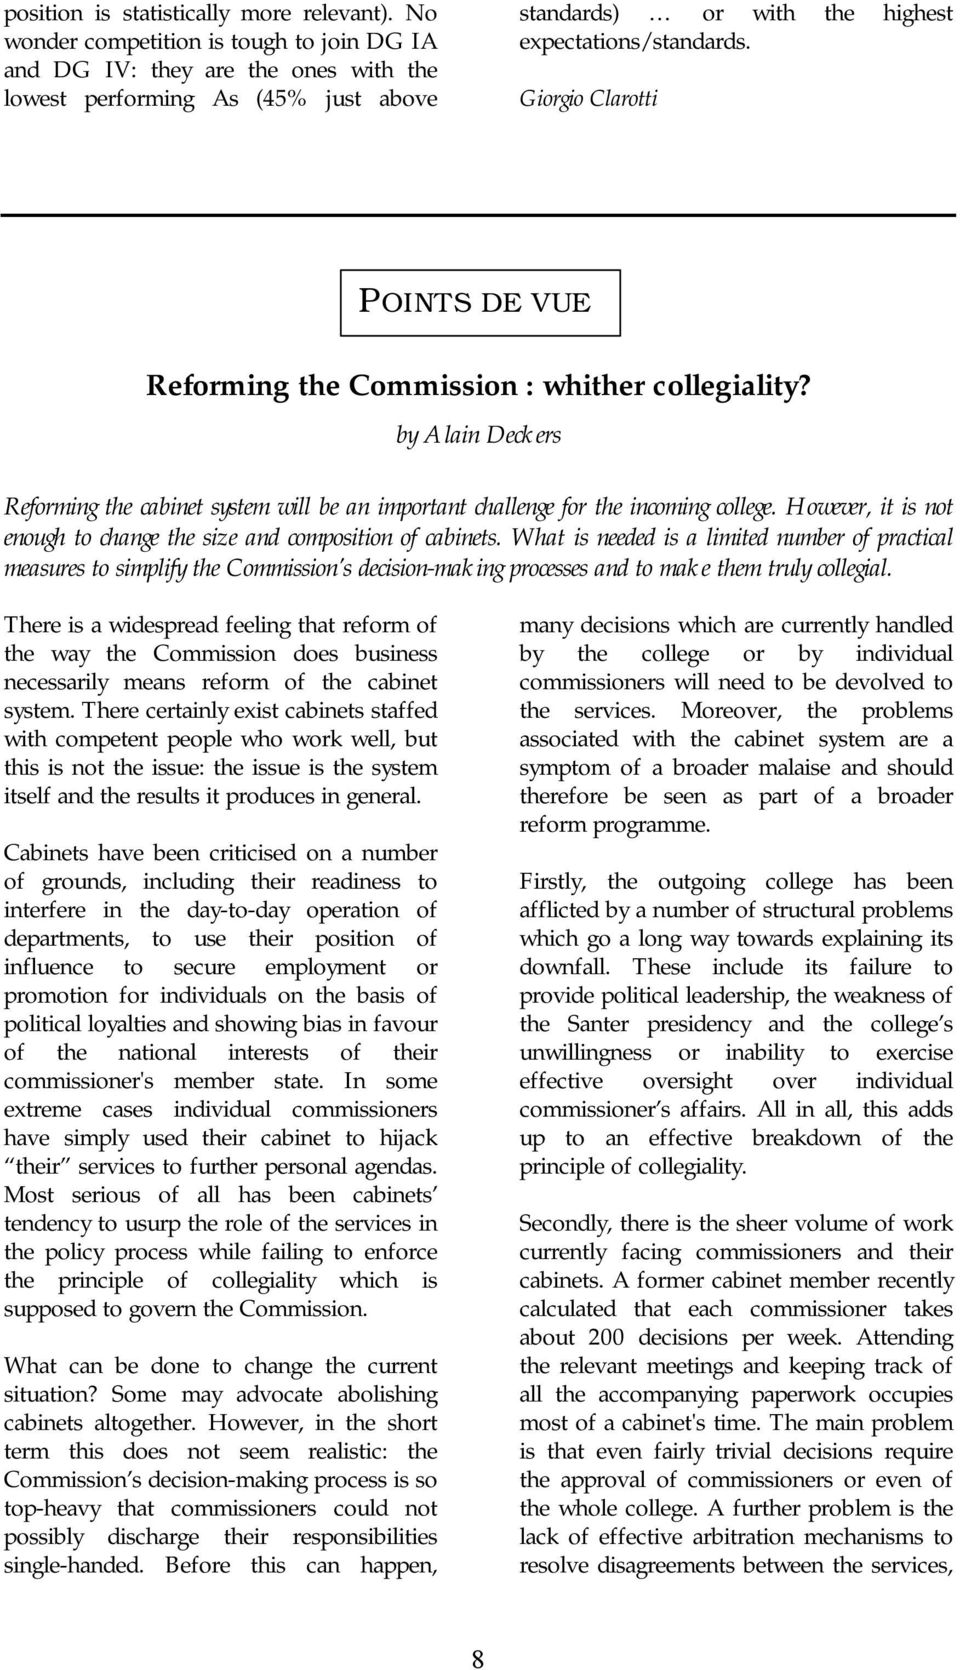 Giorgio Clarotti POINTS DE VUE Reforming the Commission : whither collegiality? by Alain Deckers Reforming the cabinet system will be an important challenge for the incoming college.